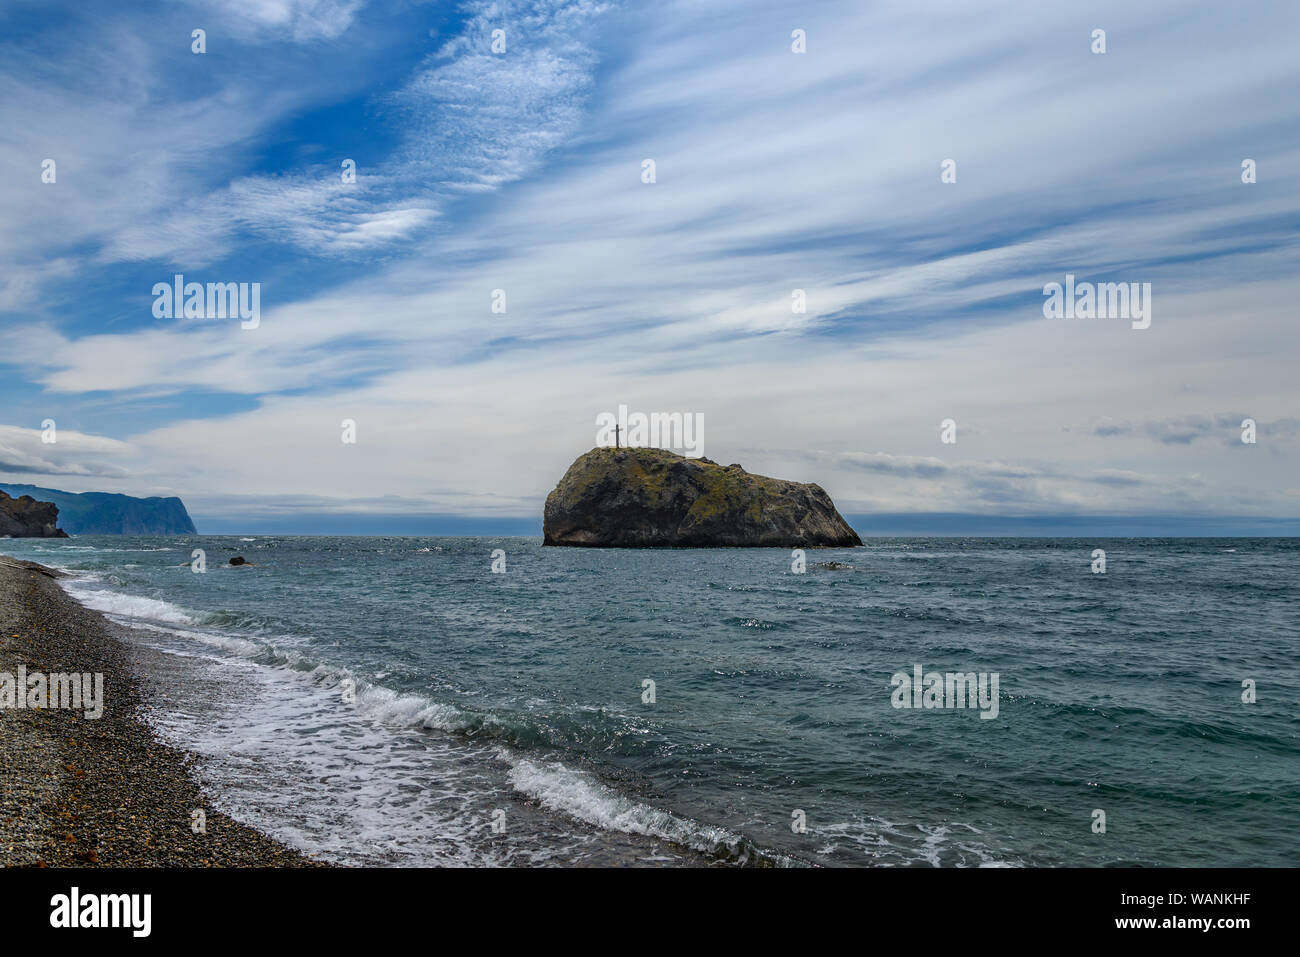 Rock with a cross stands in the sea against the cloudy sky Stock Photo